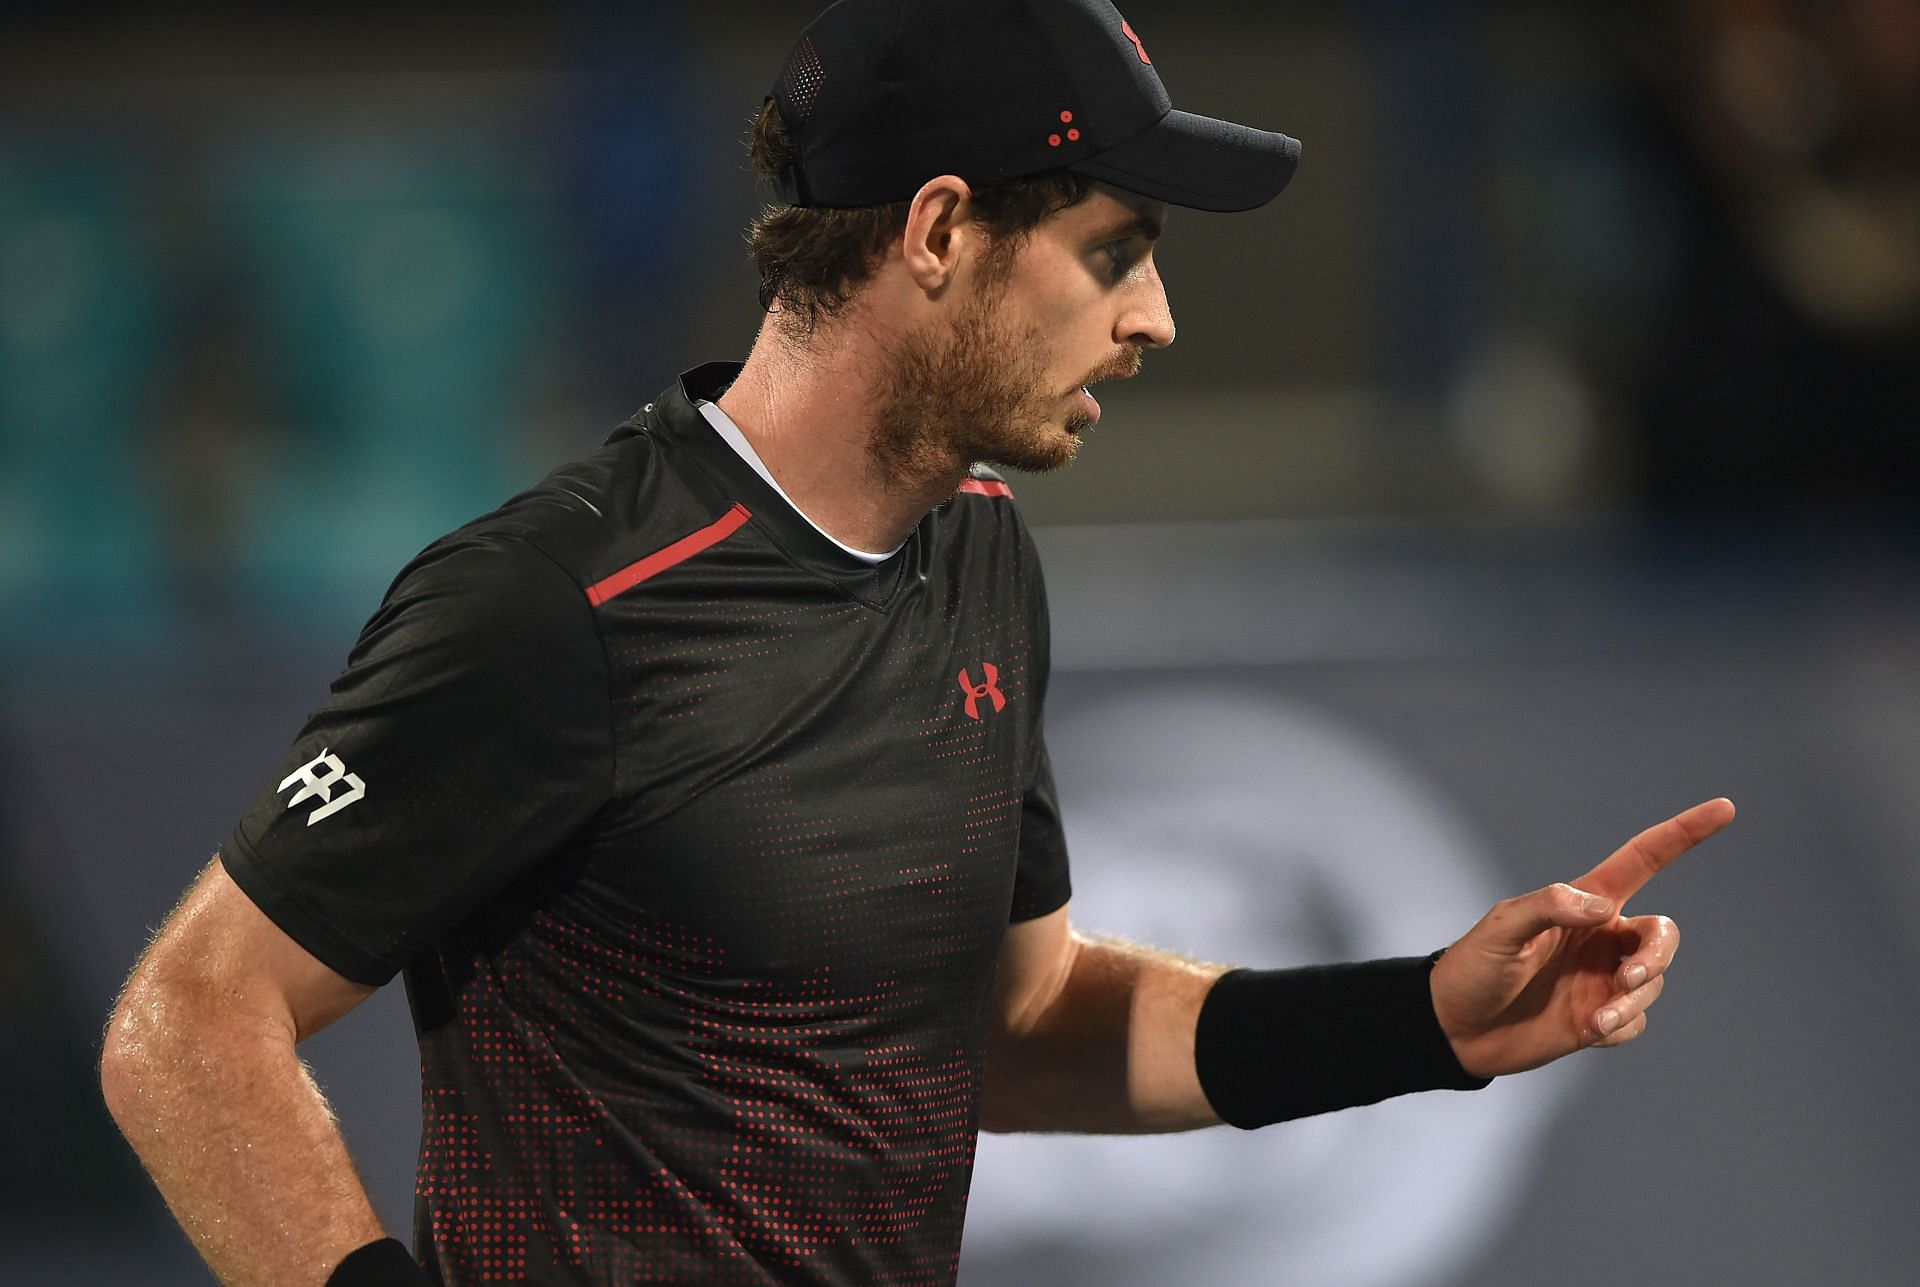 Two-time winner Andy Murray will be appearing at the 2021 Mubadala World Tennis Championship